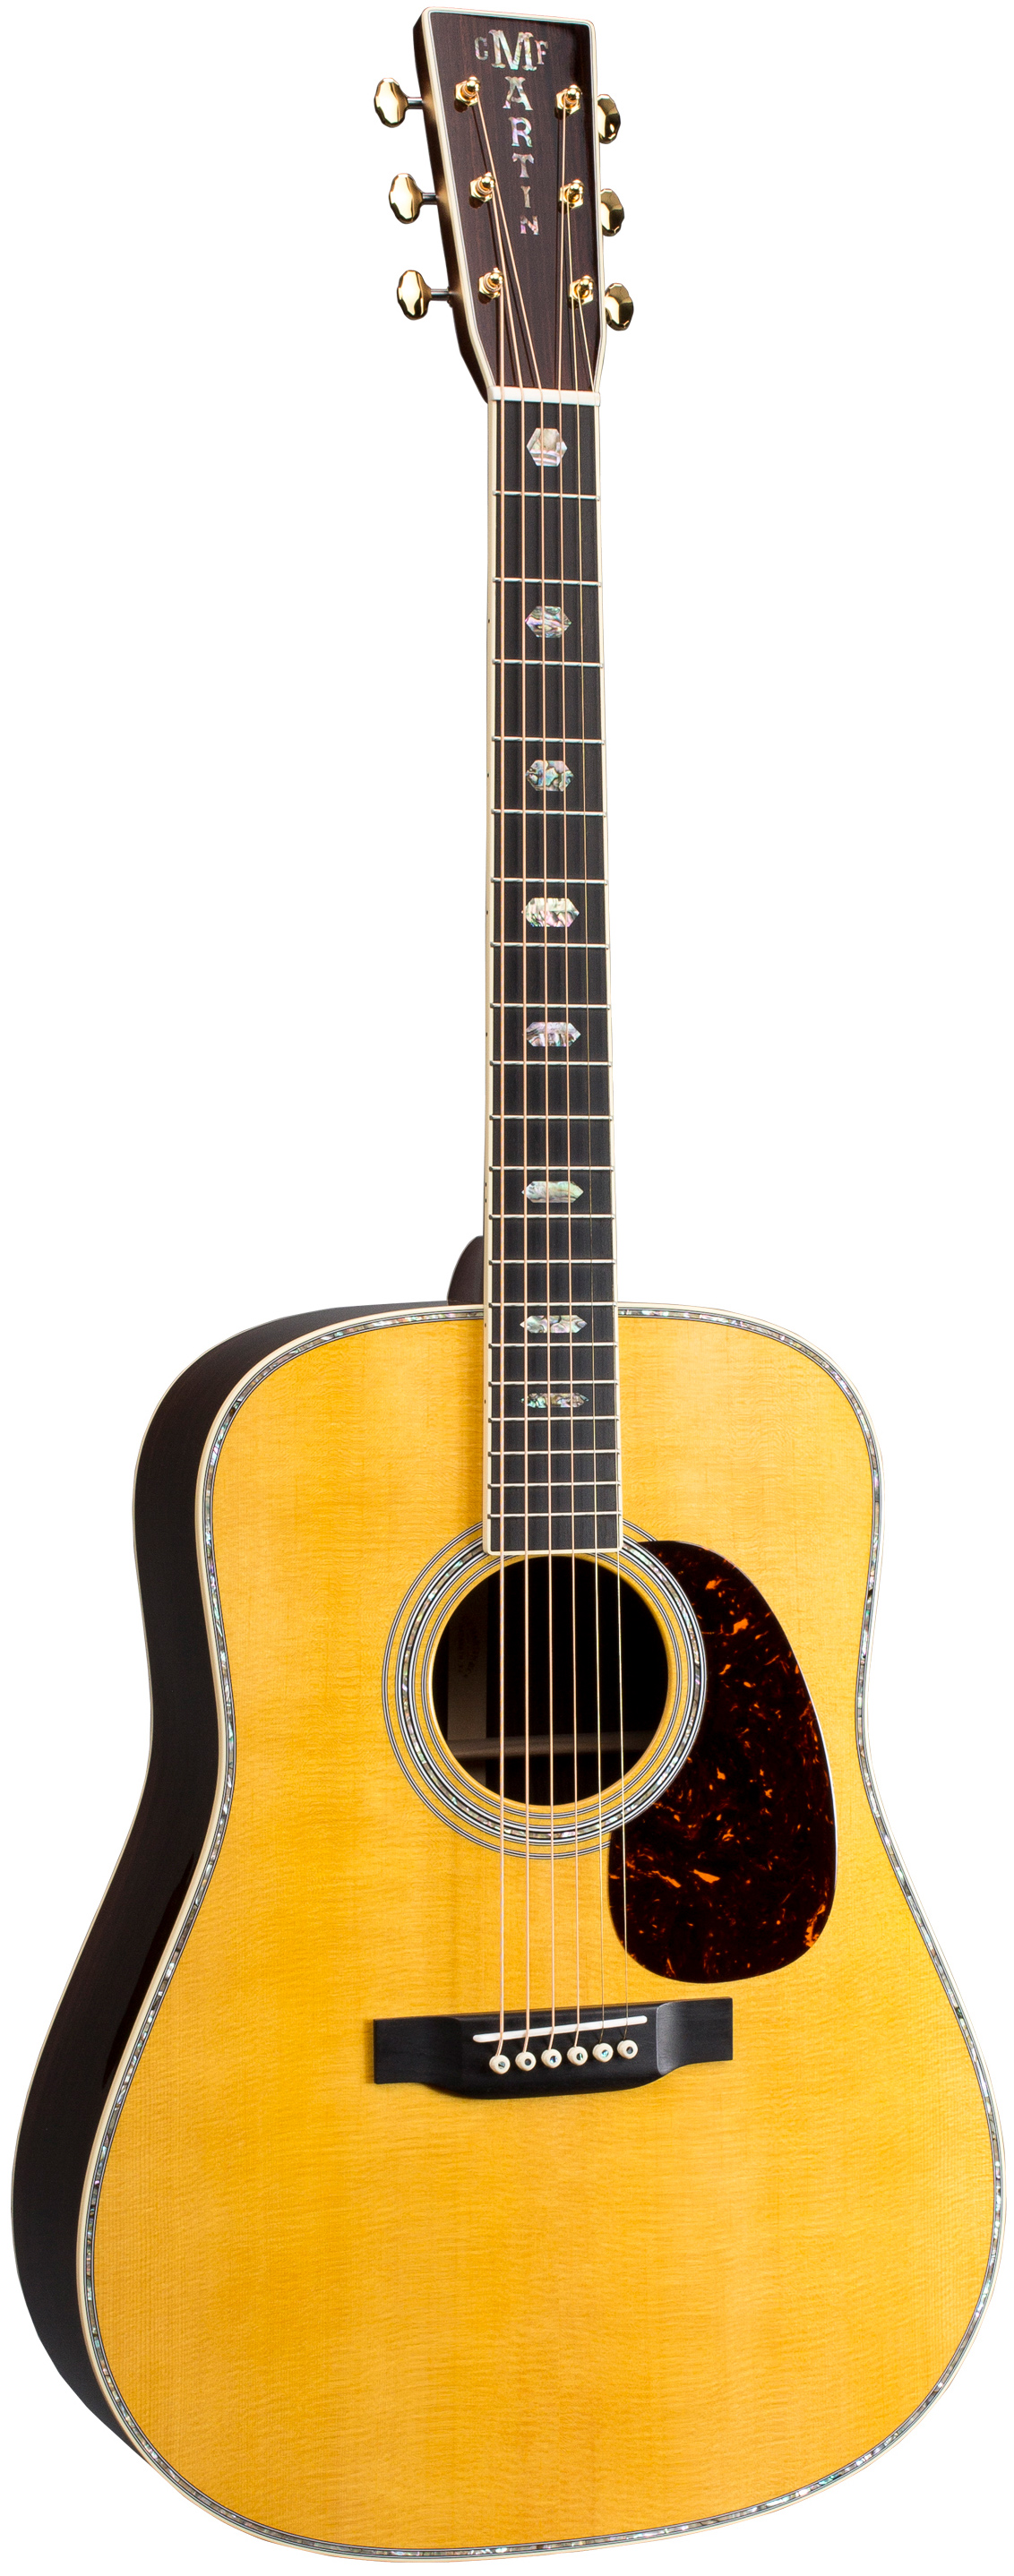 Buy the Martin D41 Re-imagined